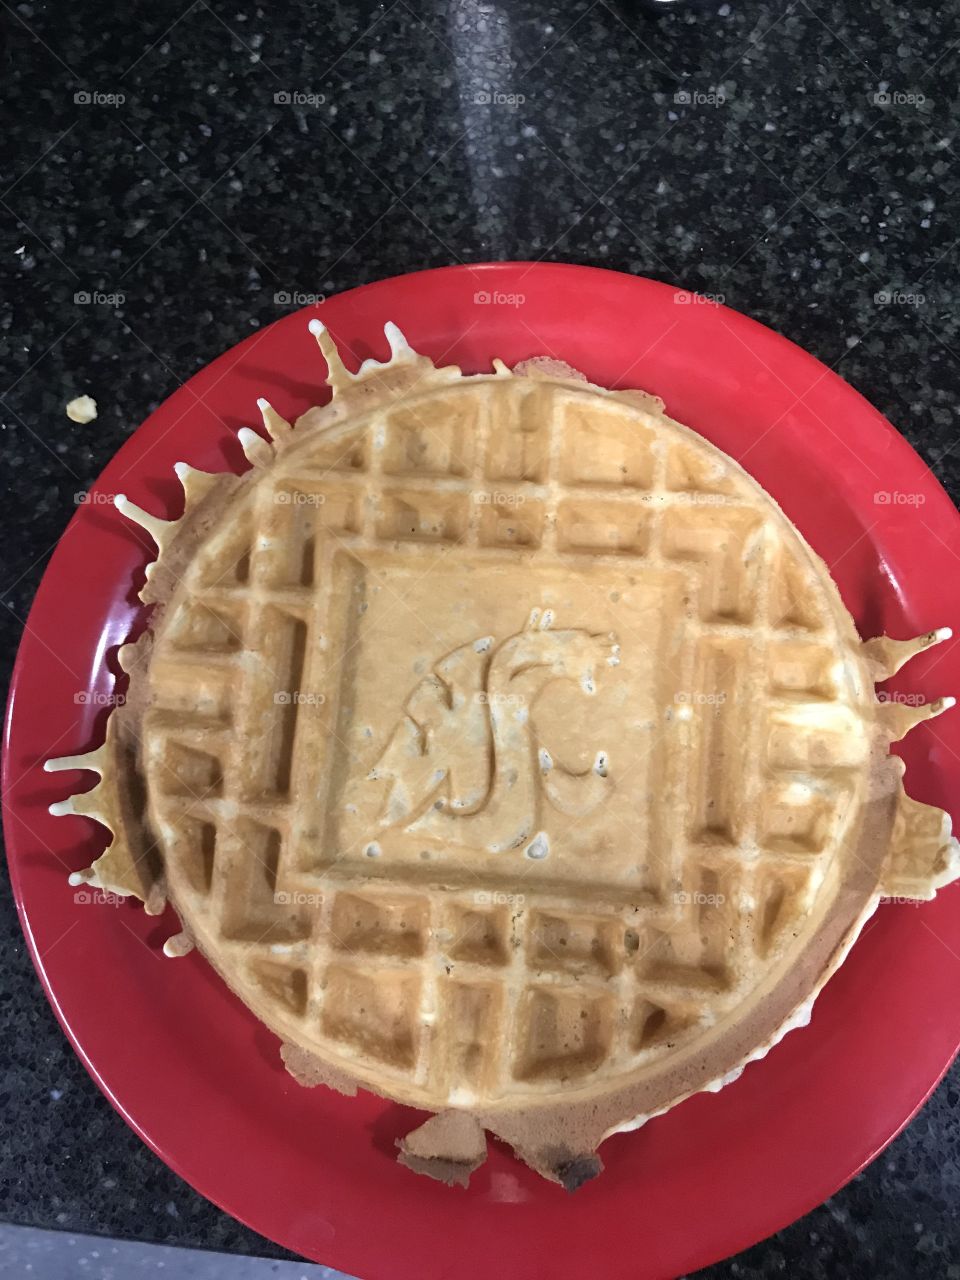 Simple golden brown waffle with the Washington state university symbol cooked into the top